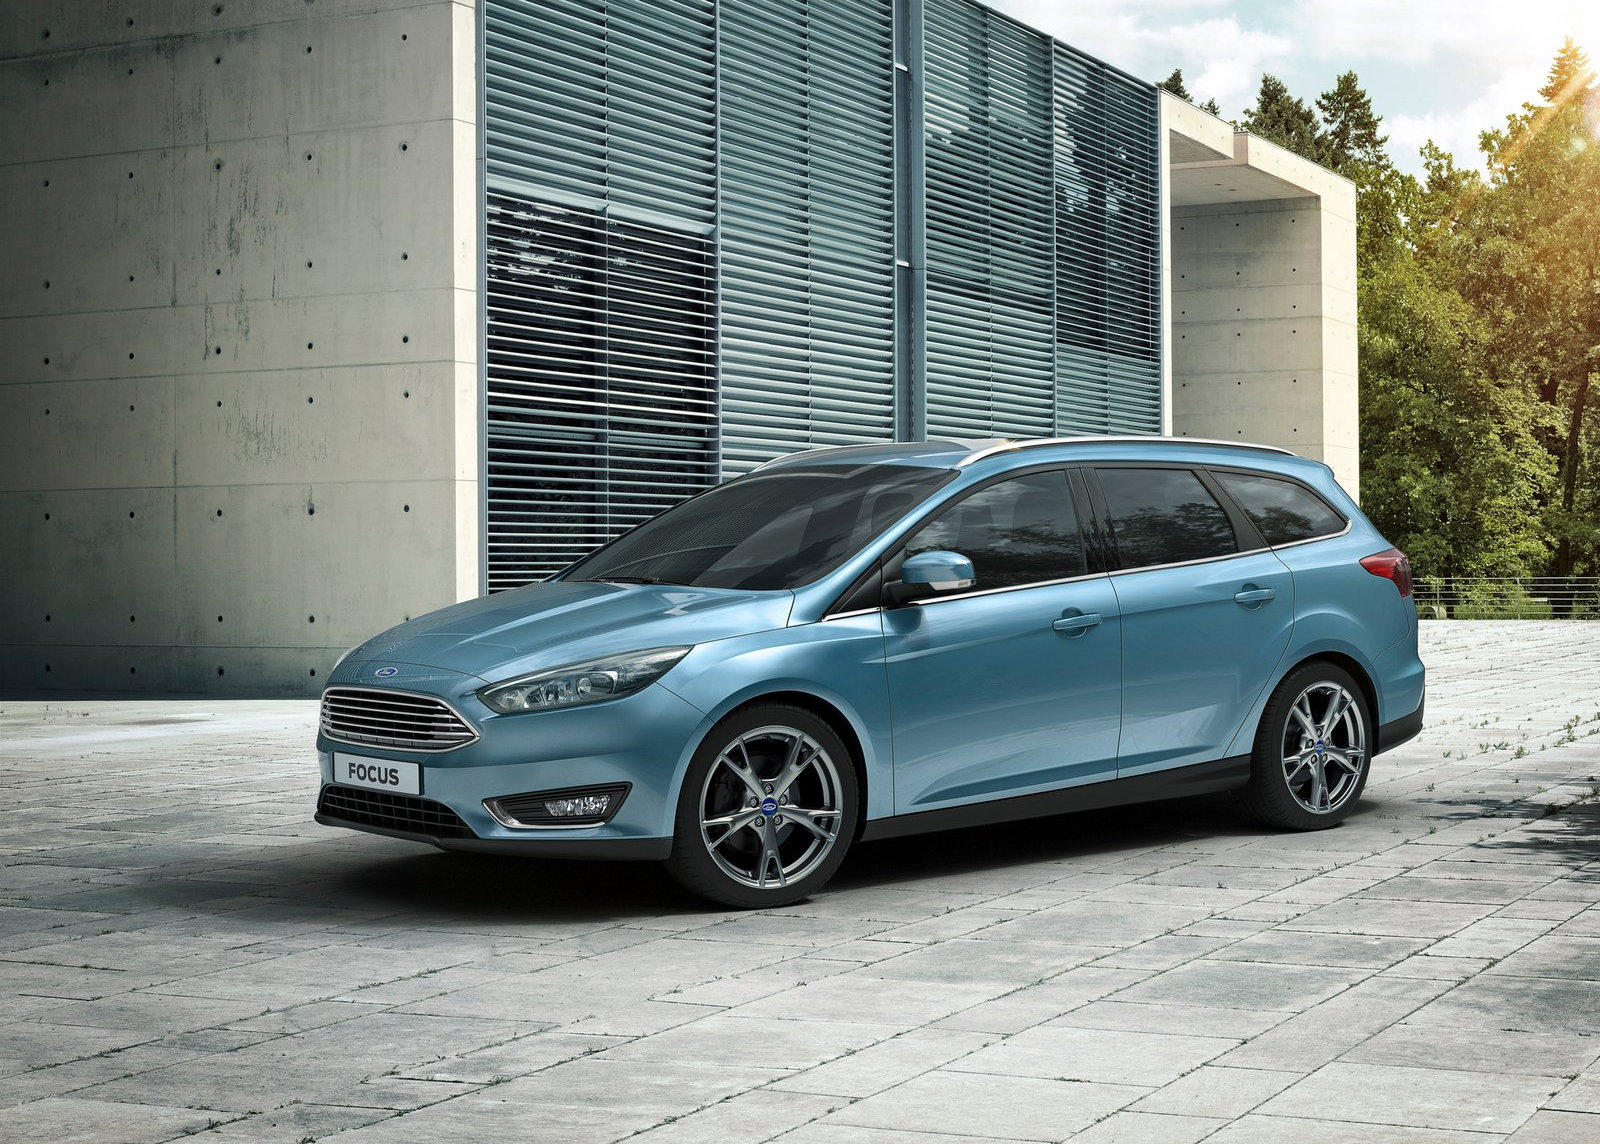 2015 Ford Focus Pricing for Europe Starts From €18,750